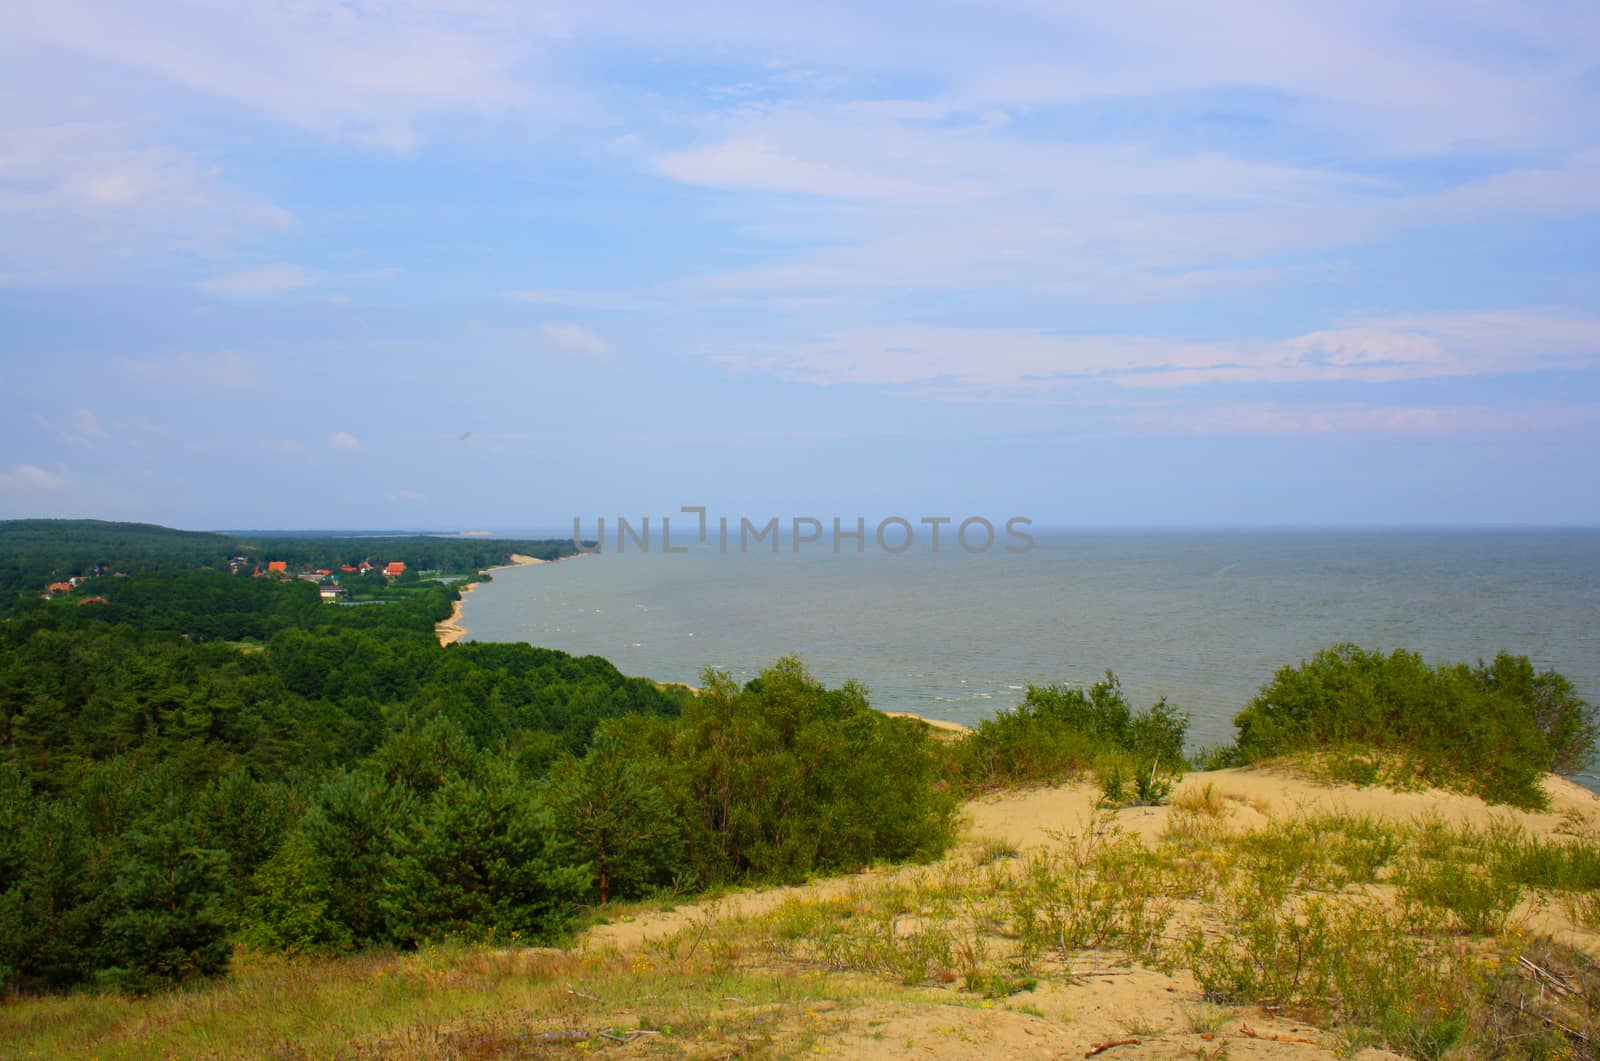 View of Dead Dunes, Curonian Spit by alexx60